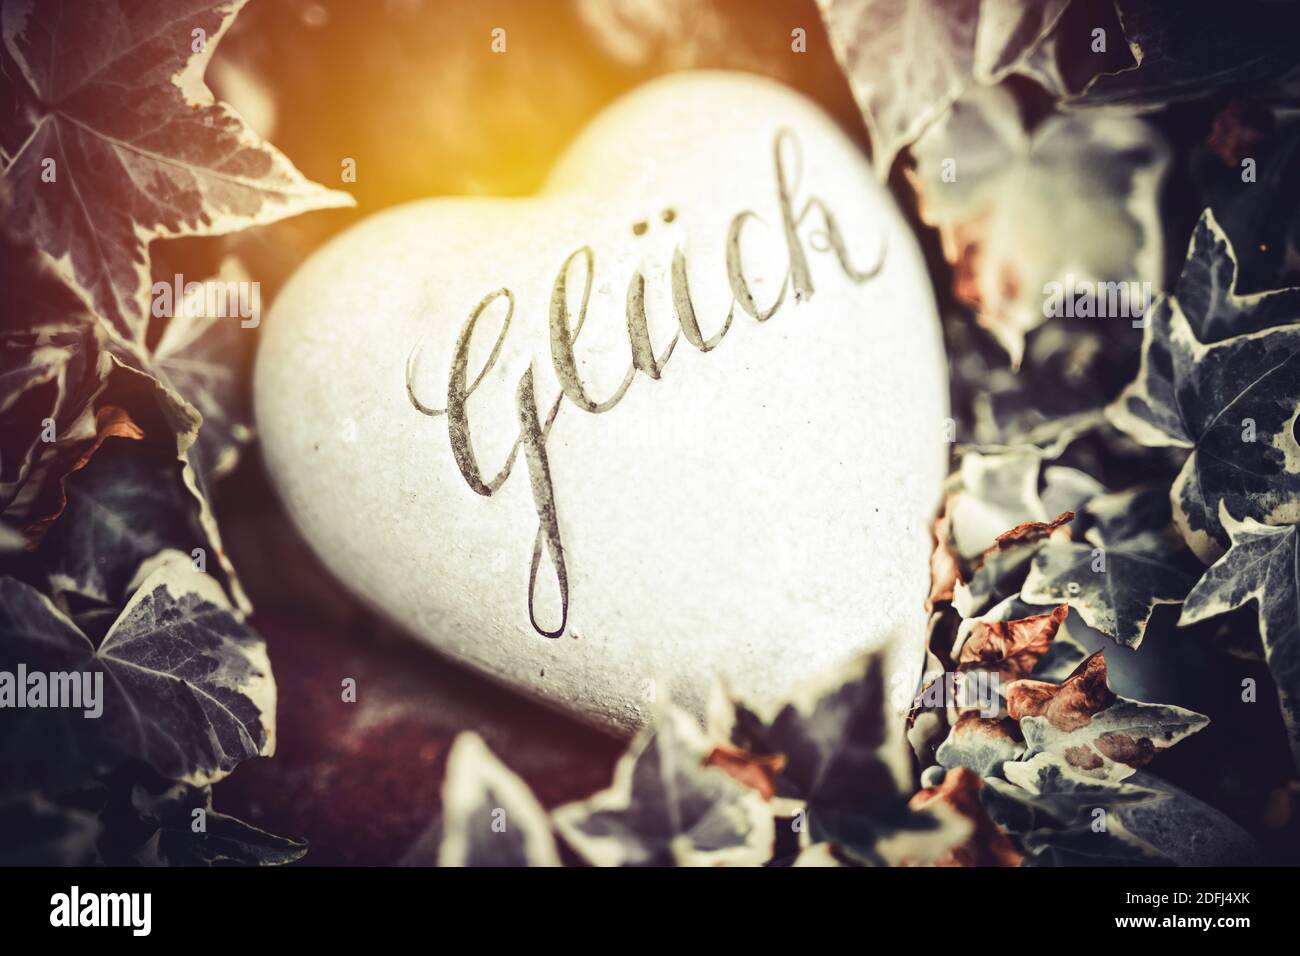 The German Word For Happiness On A Heart Shaped Stone Stock Photo